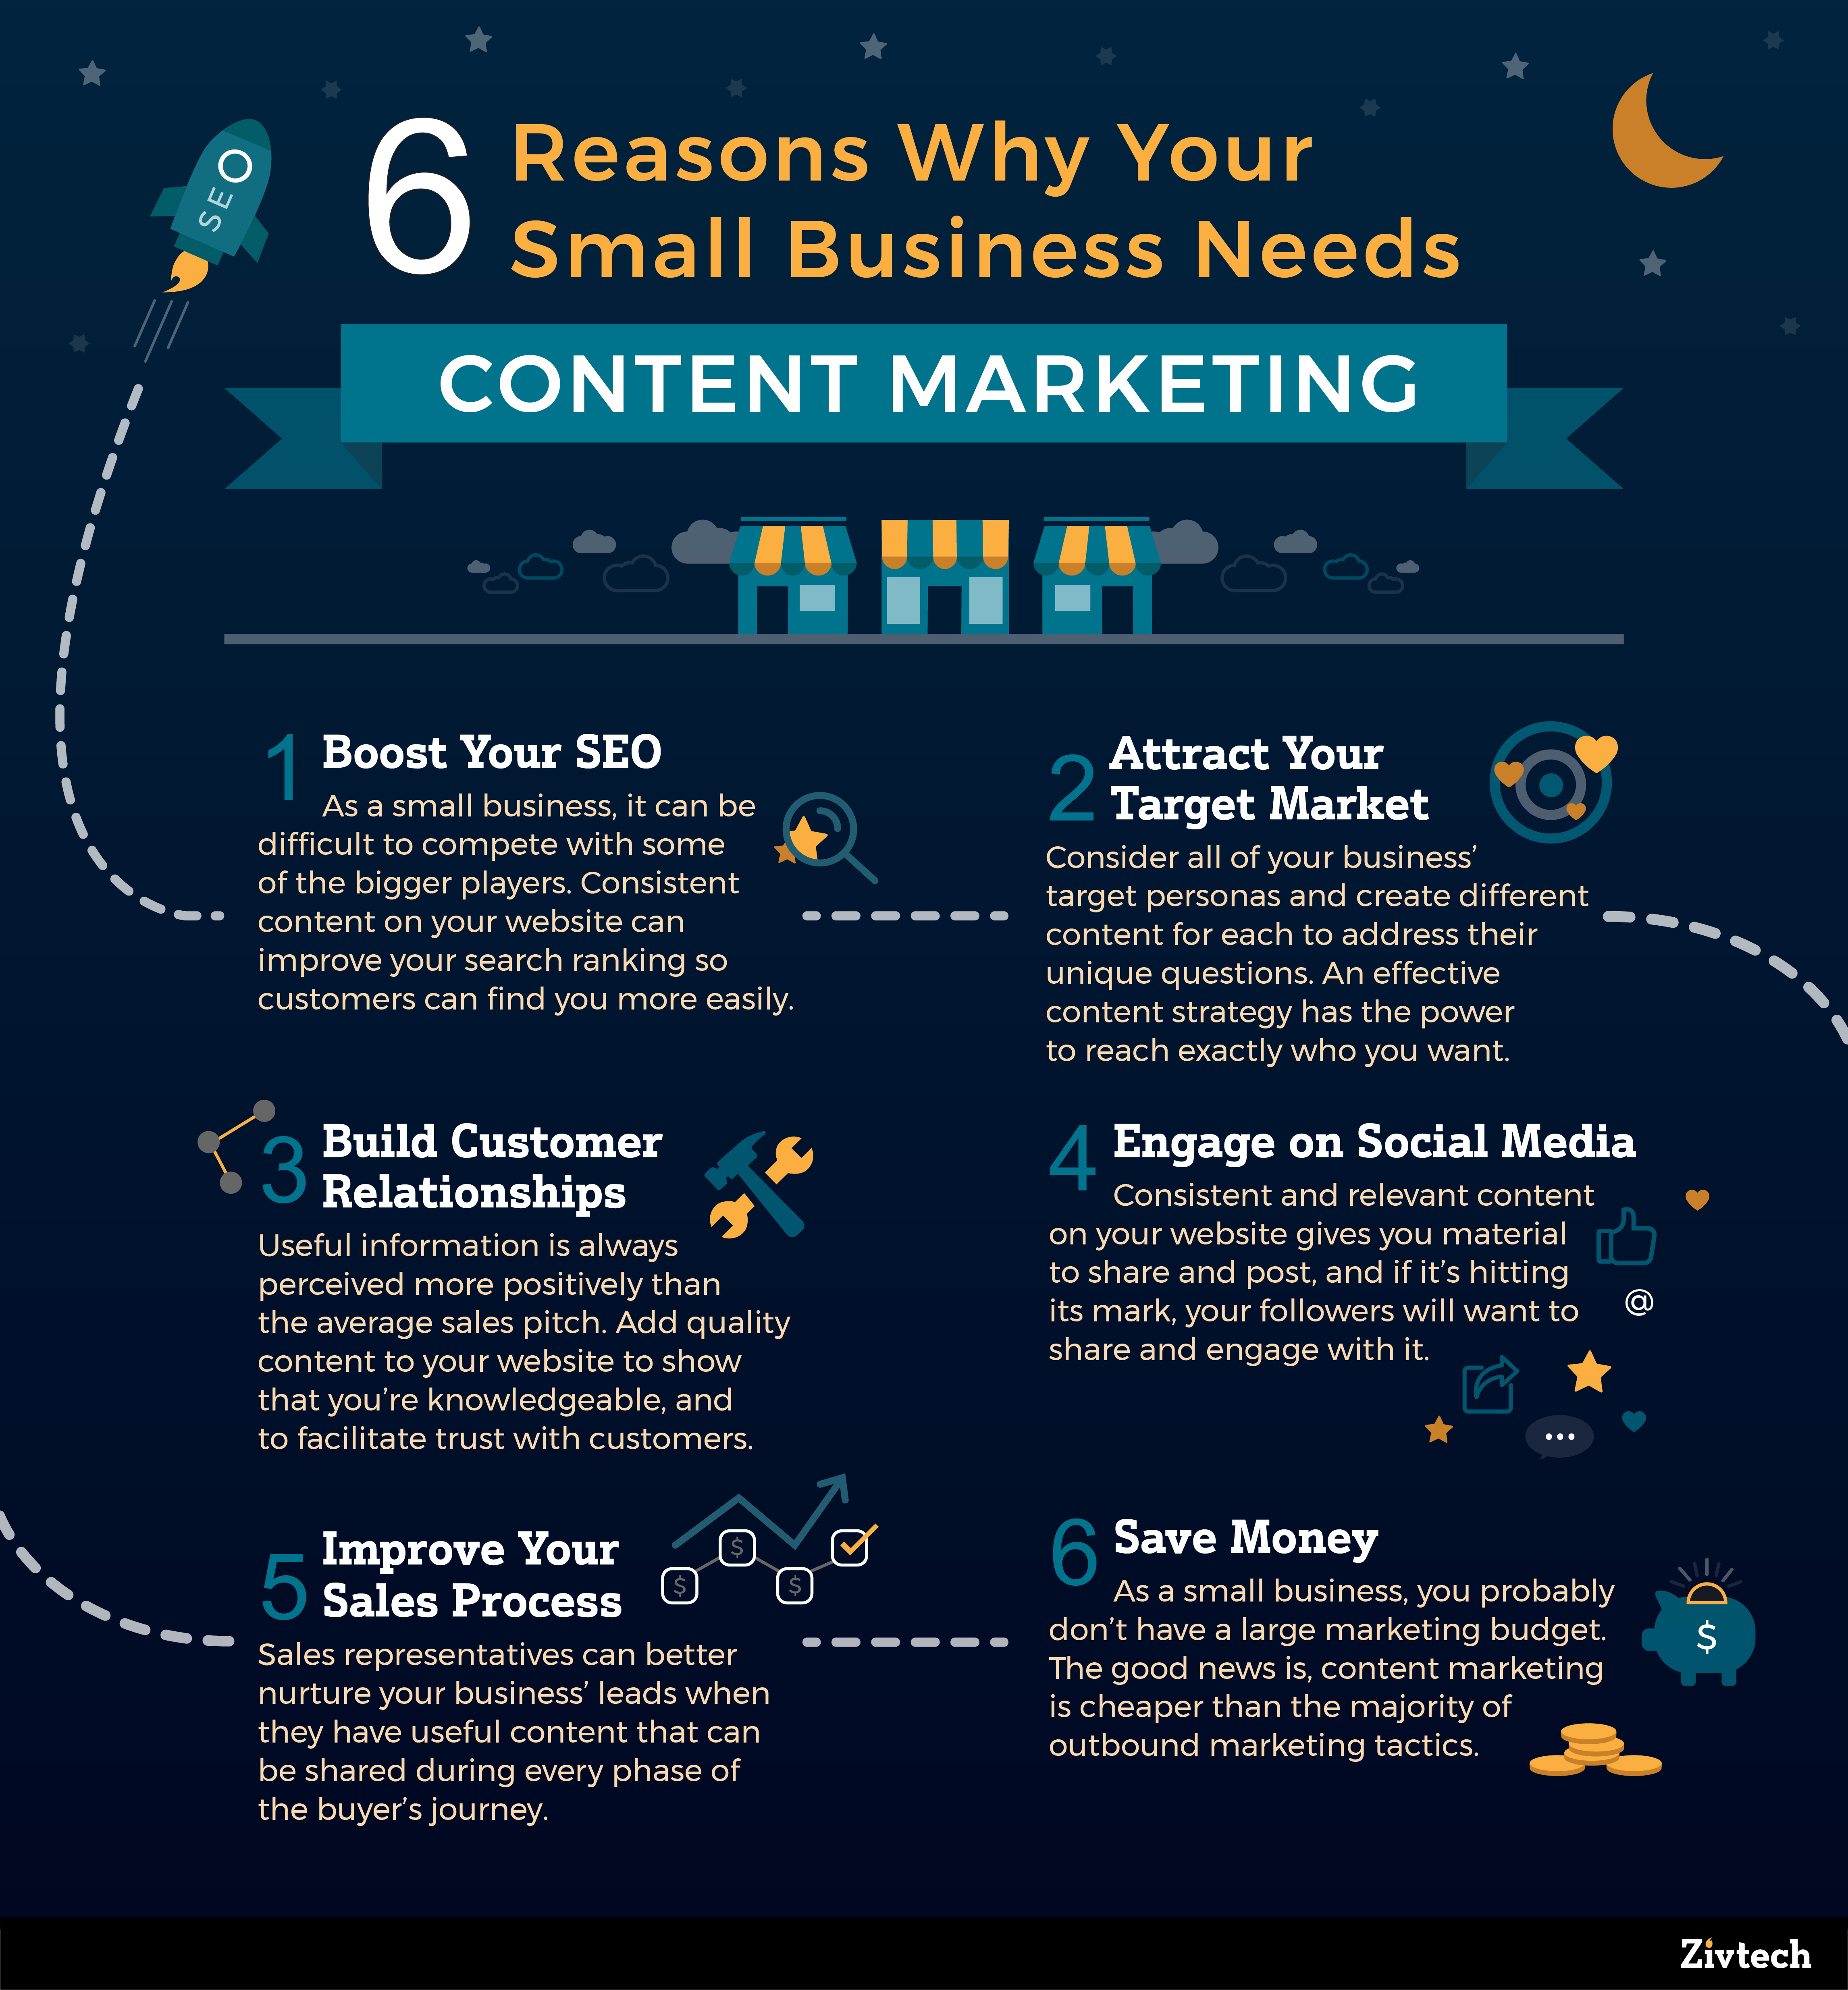 6 REASONS WHY YOUR SMALL BUSINESS NEEDS CONTENT MARKETING INFOGRAPHIC